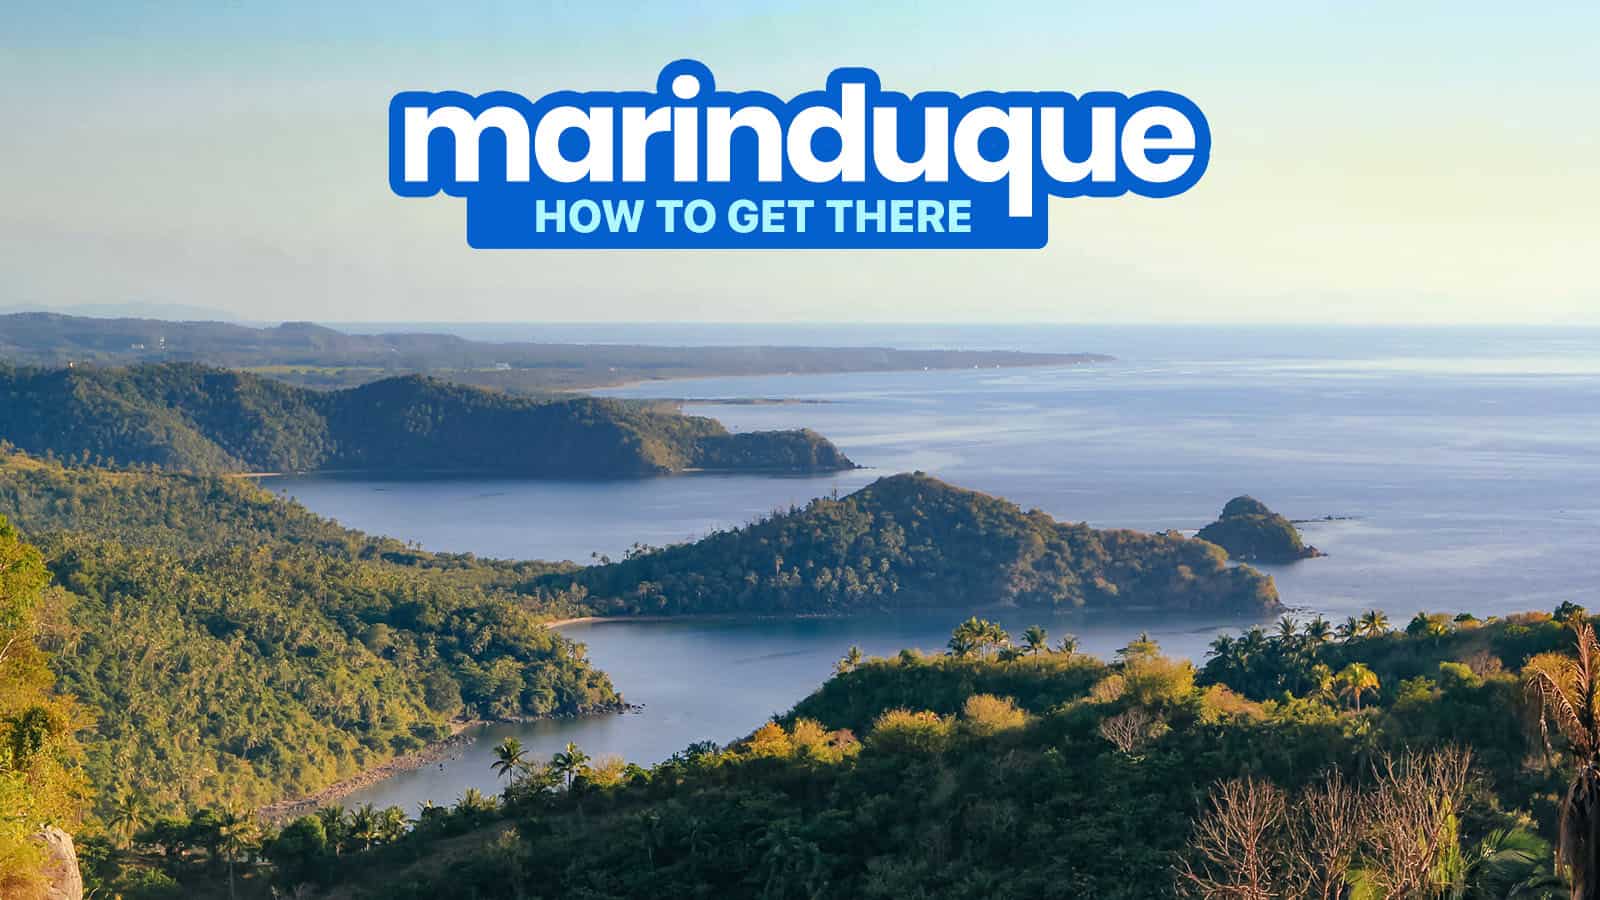 How to Get from MANILA TO MARINDUQUE: By Plane, RoRo Bus or Ferry